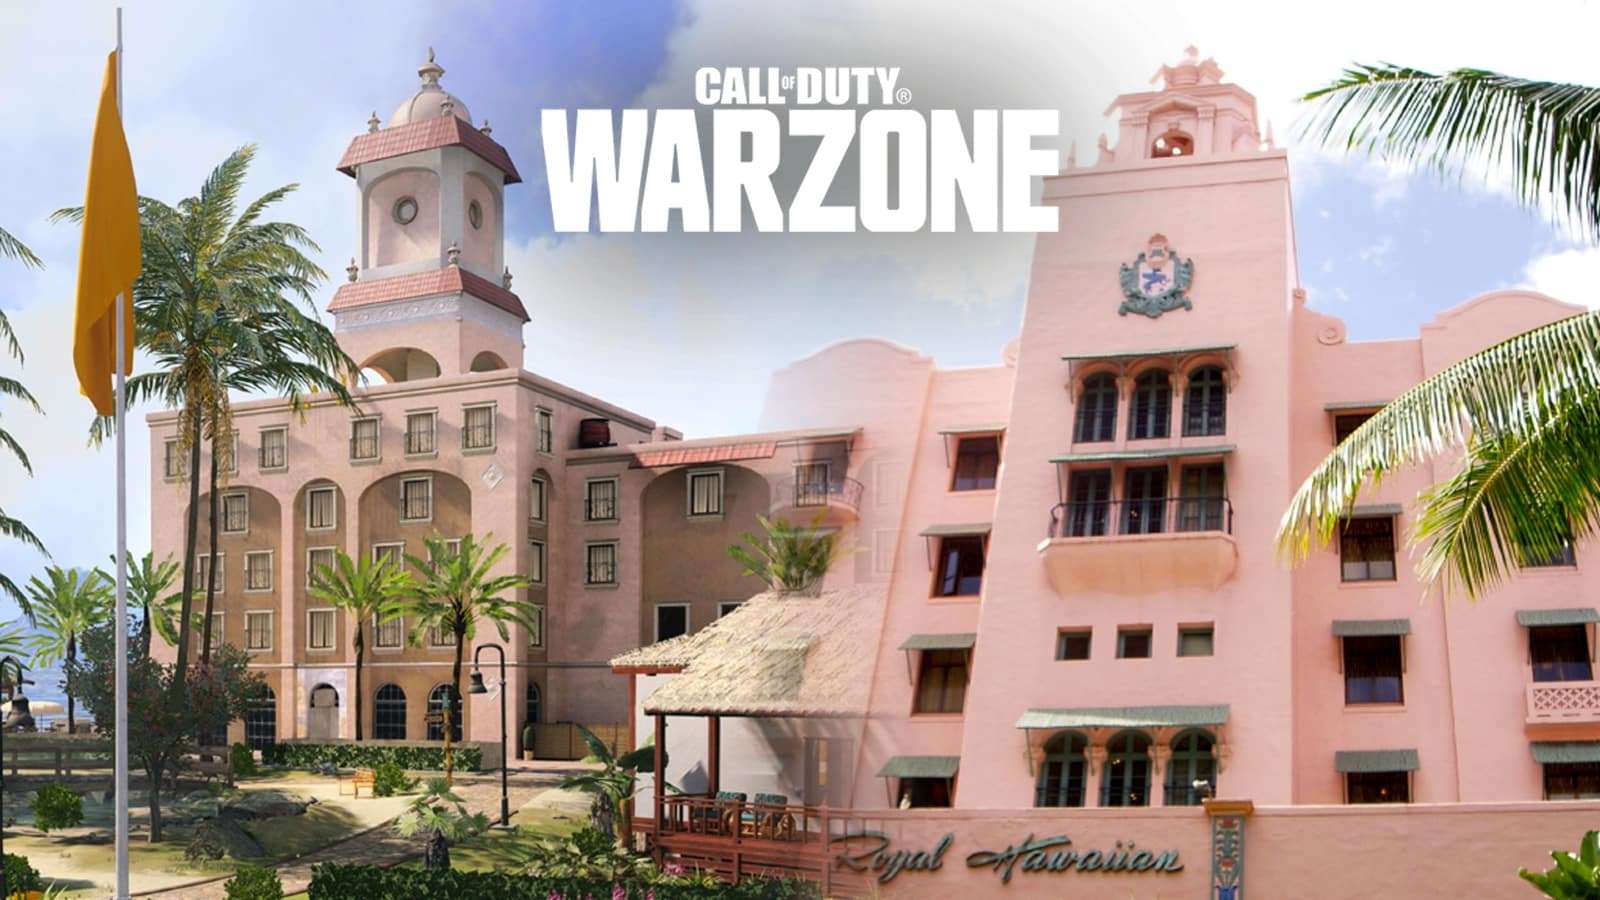 warzone capital POI with Warzone logo on top